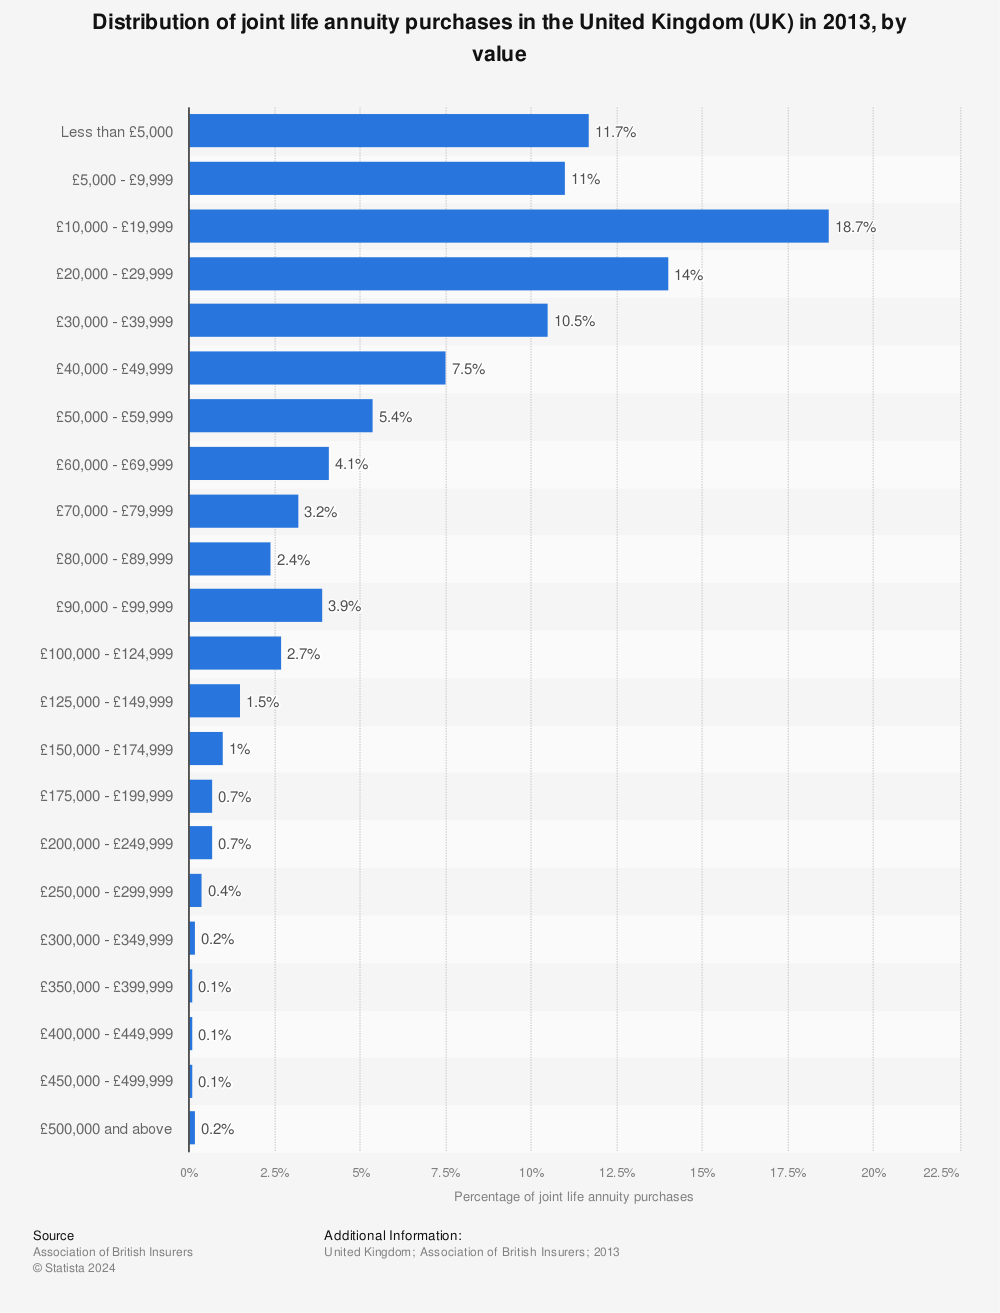 Statistic: Distribution of joint life annuity purchases in the United Kingdom (UK) in 2013, by value | Statista